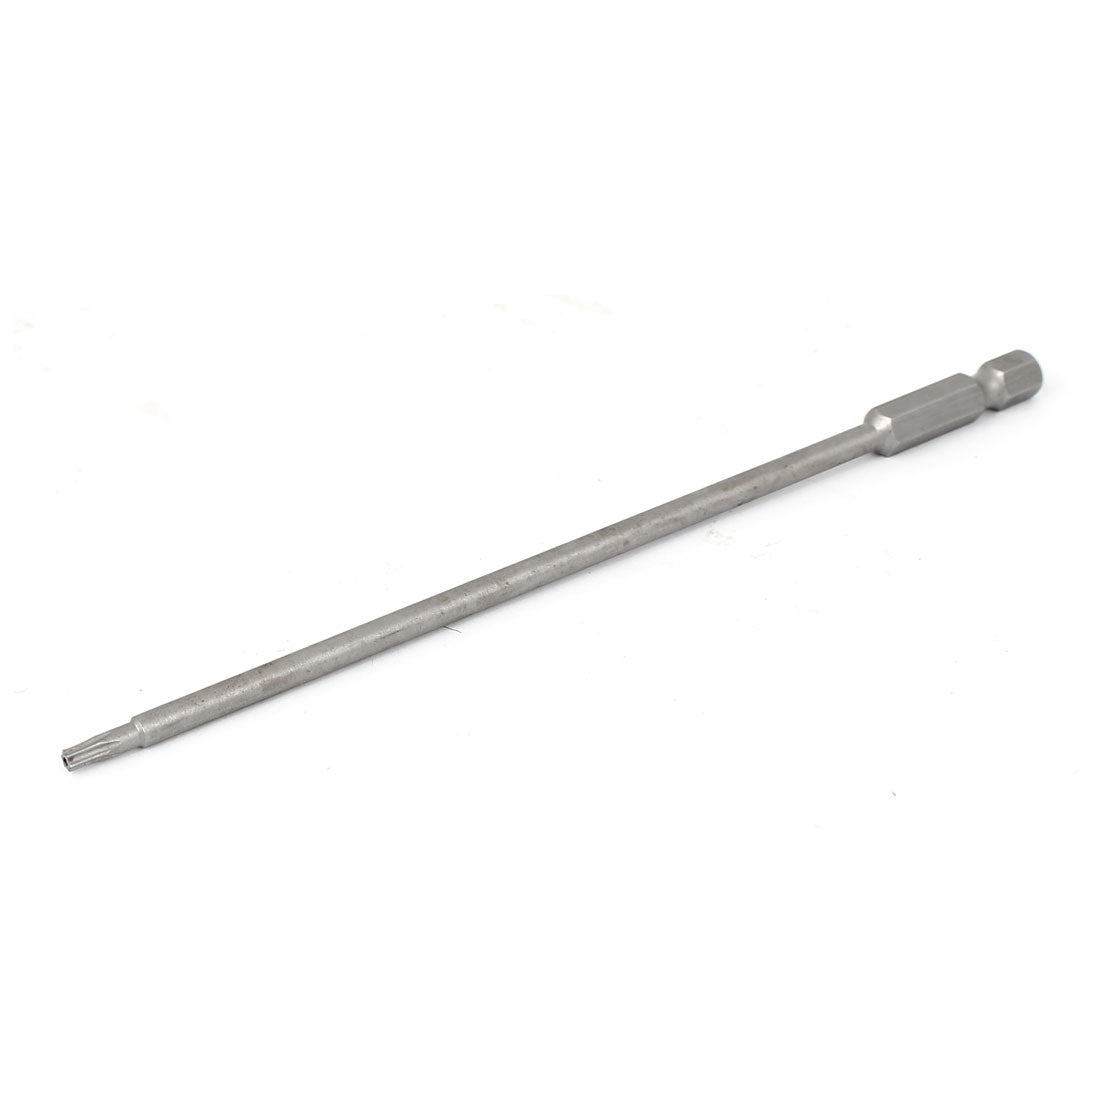 Uxcell Uxcell 150mm Length 1/4" Hex Shank T10 Magnetic Torx Security Screwdriver Bits